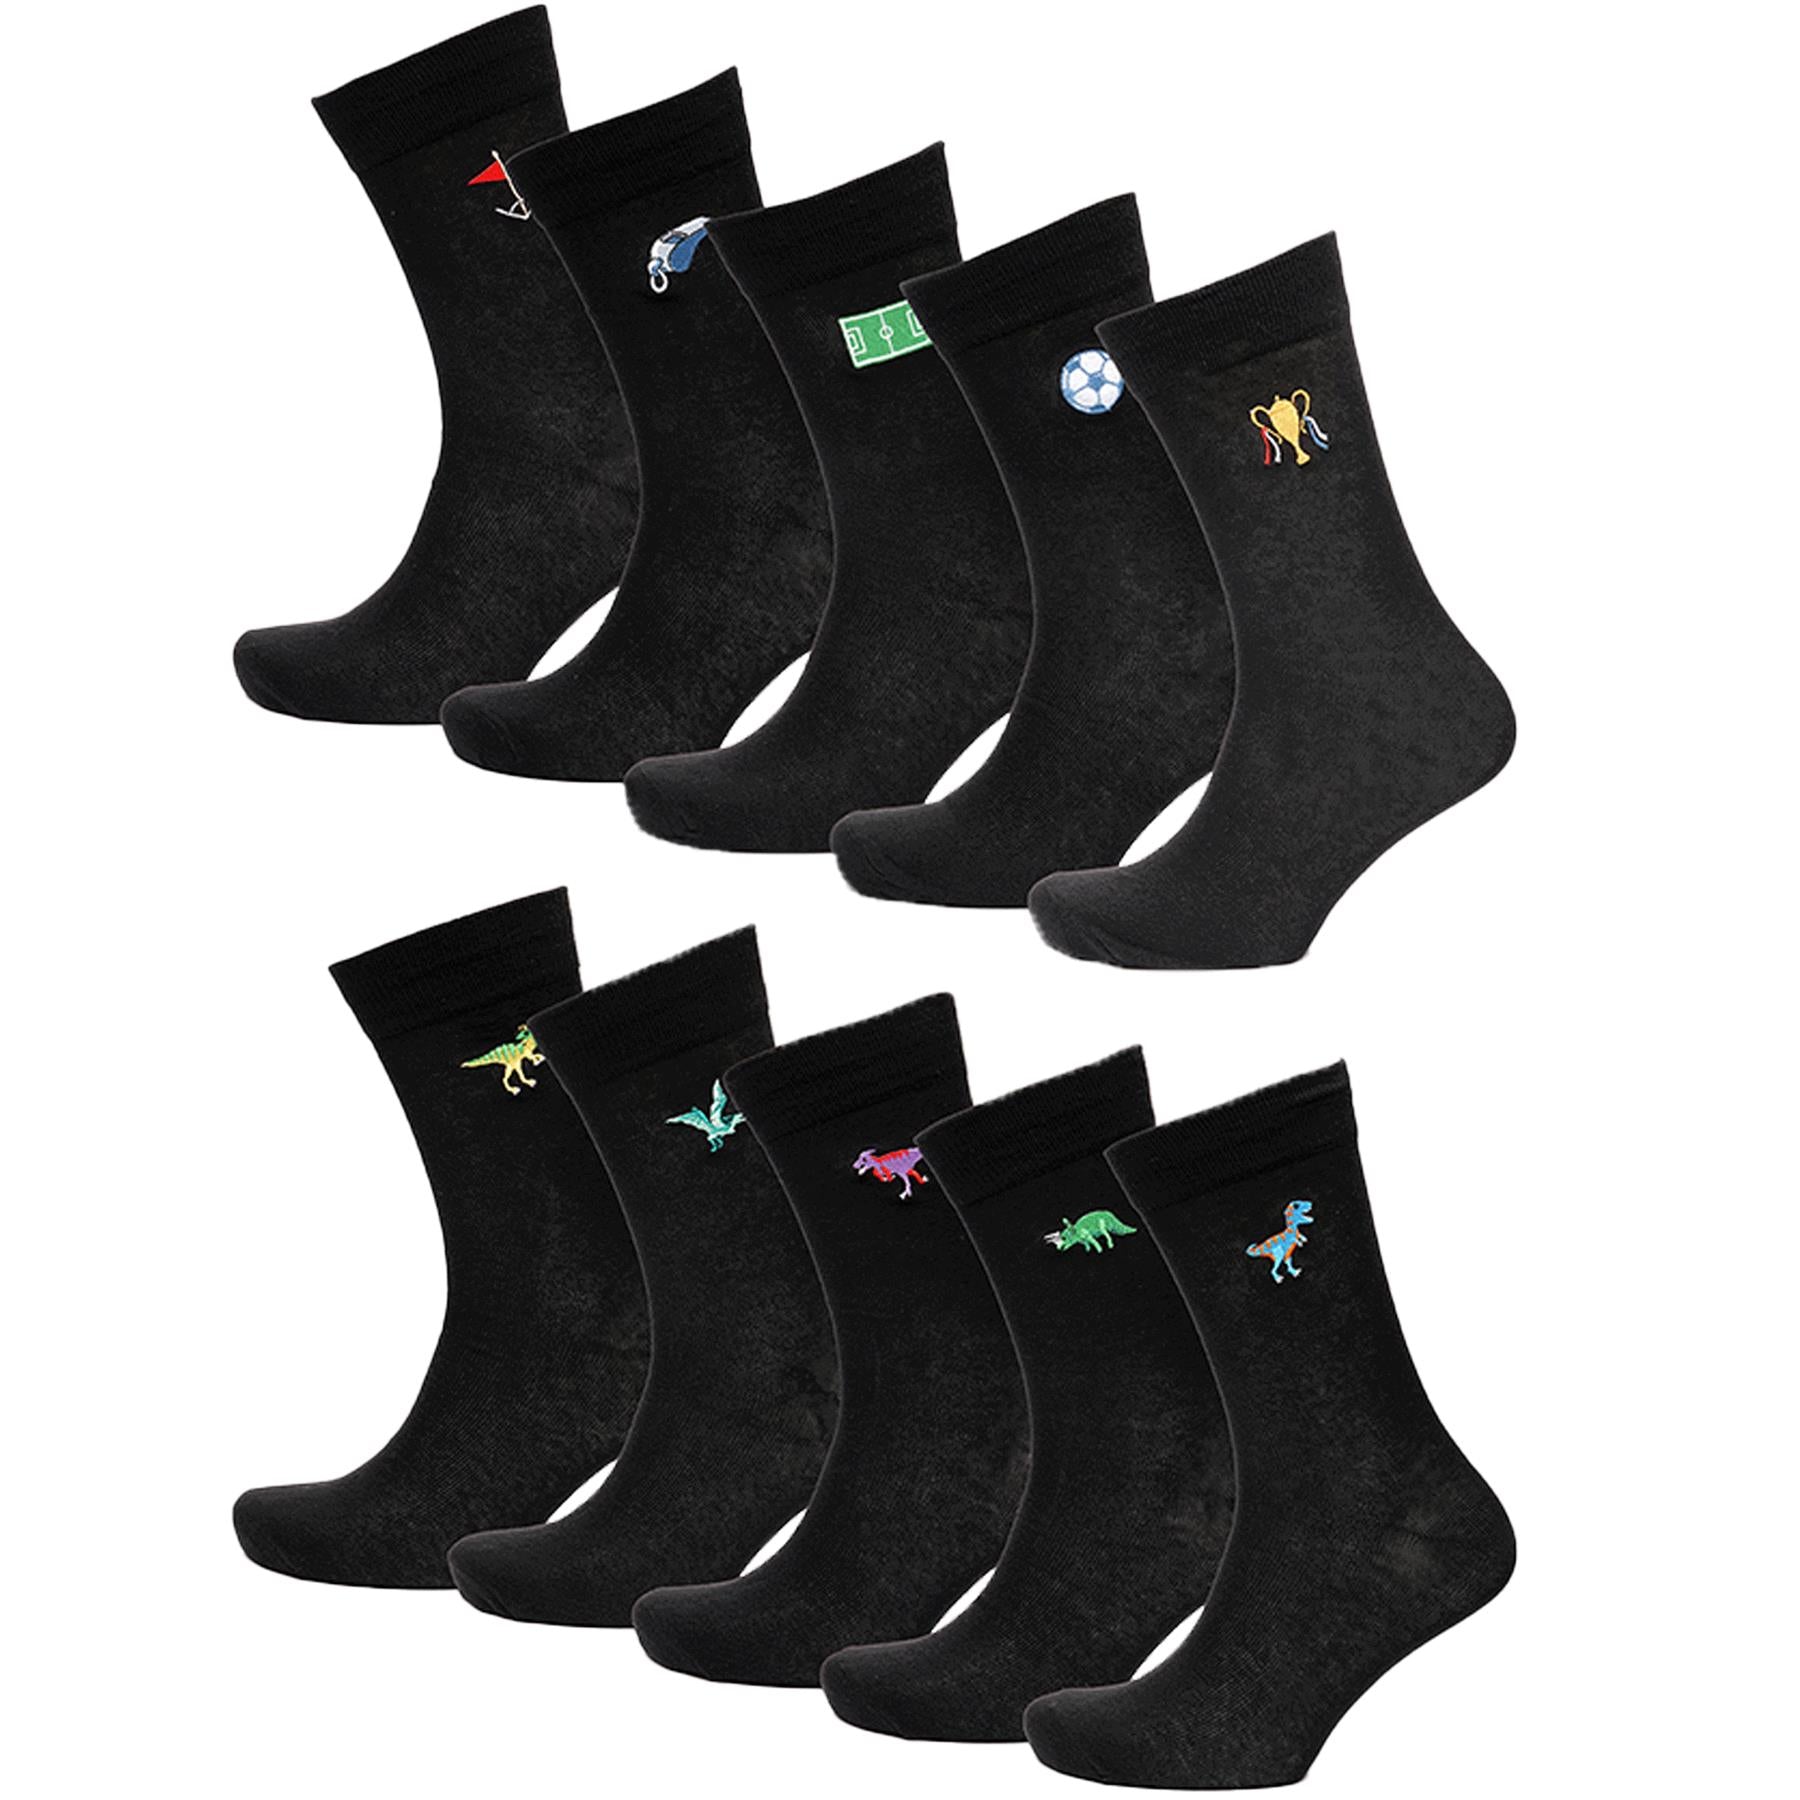 Mens Crew Embroidered Football and Dino Pack of 5 Rich Cotton Comfortable Socks